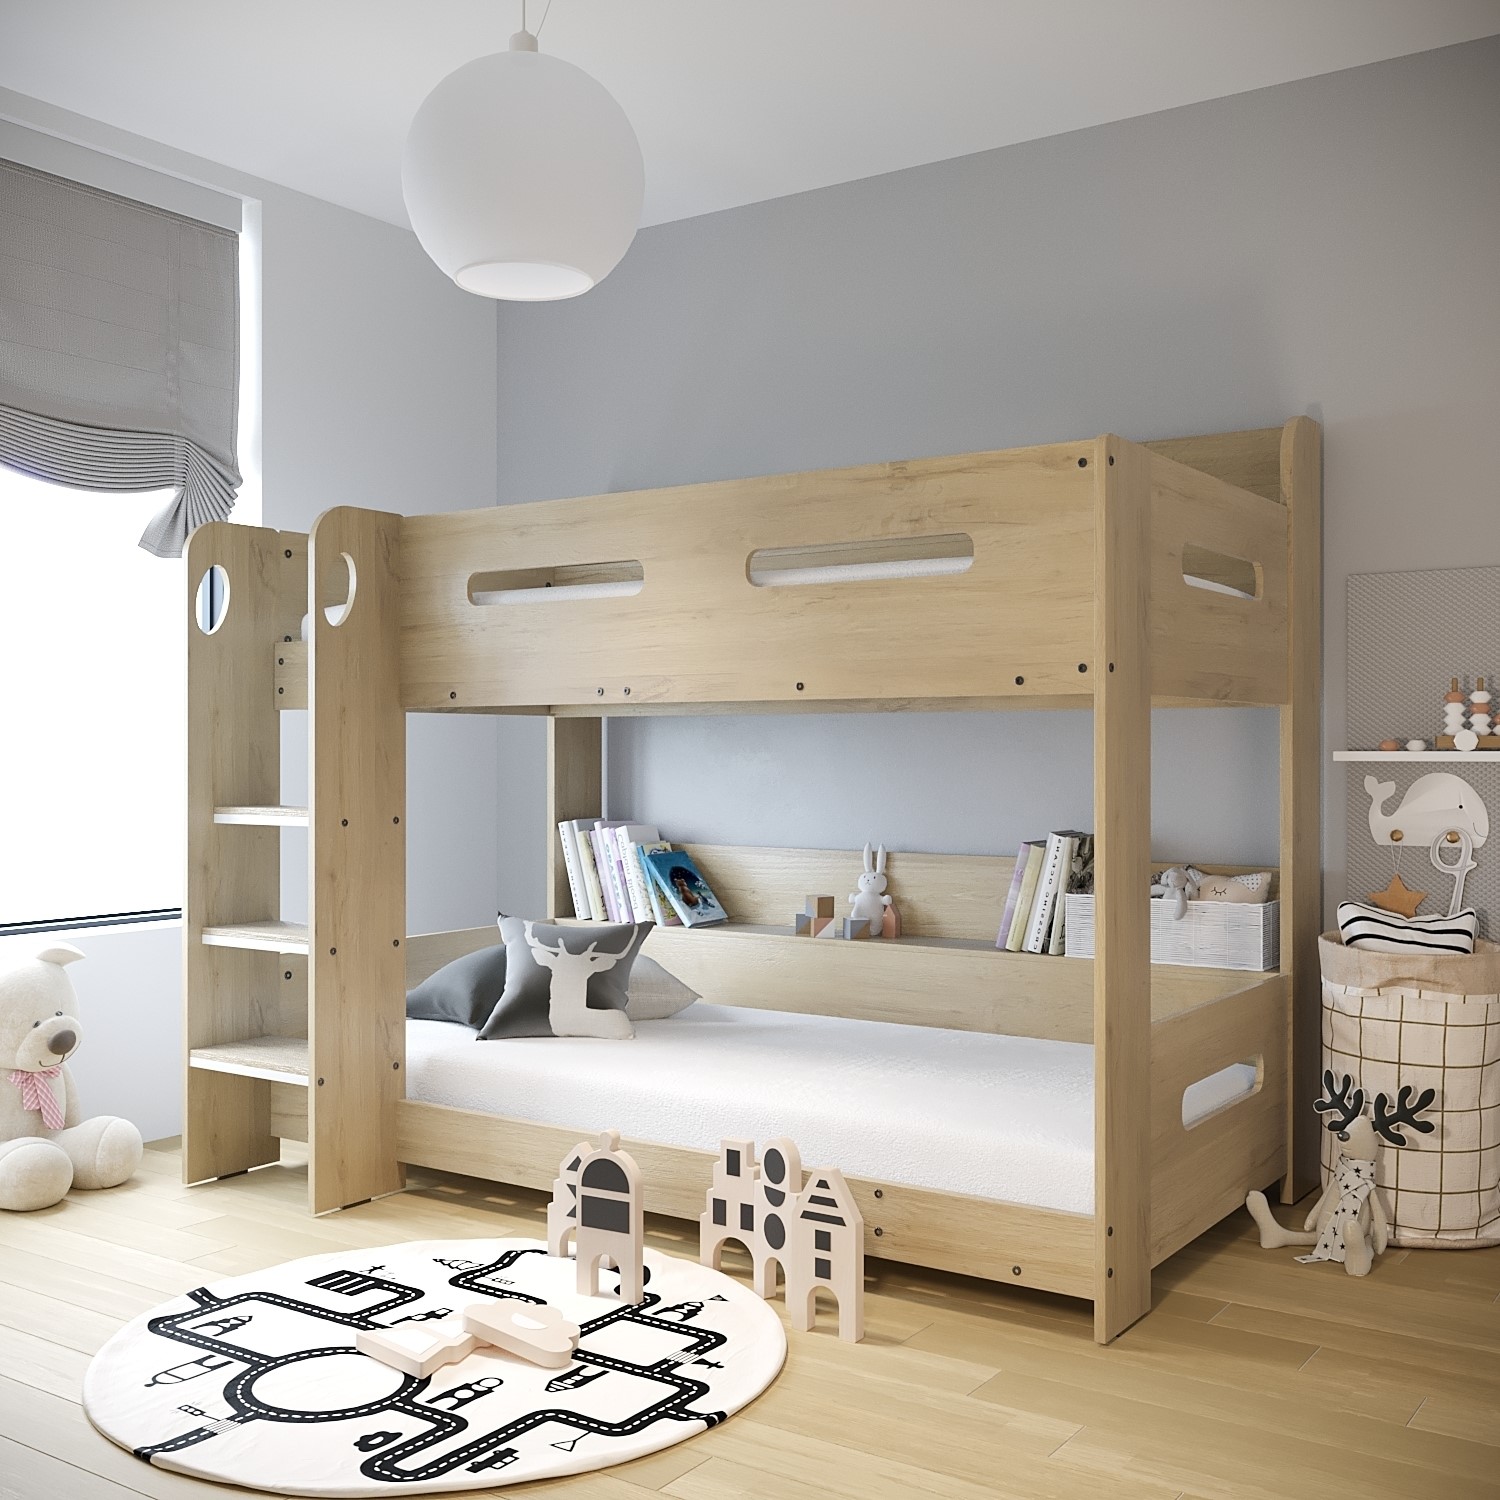 Photo of Oak bunk bed with shelves - sky